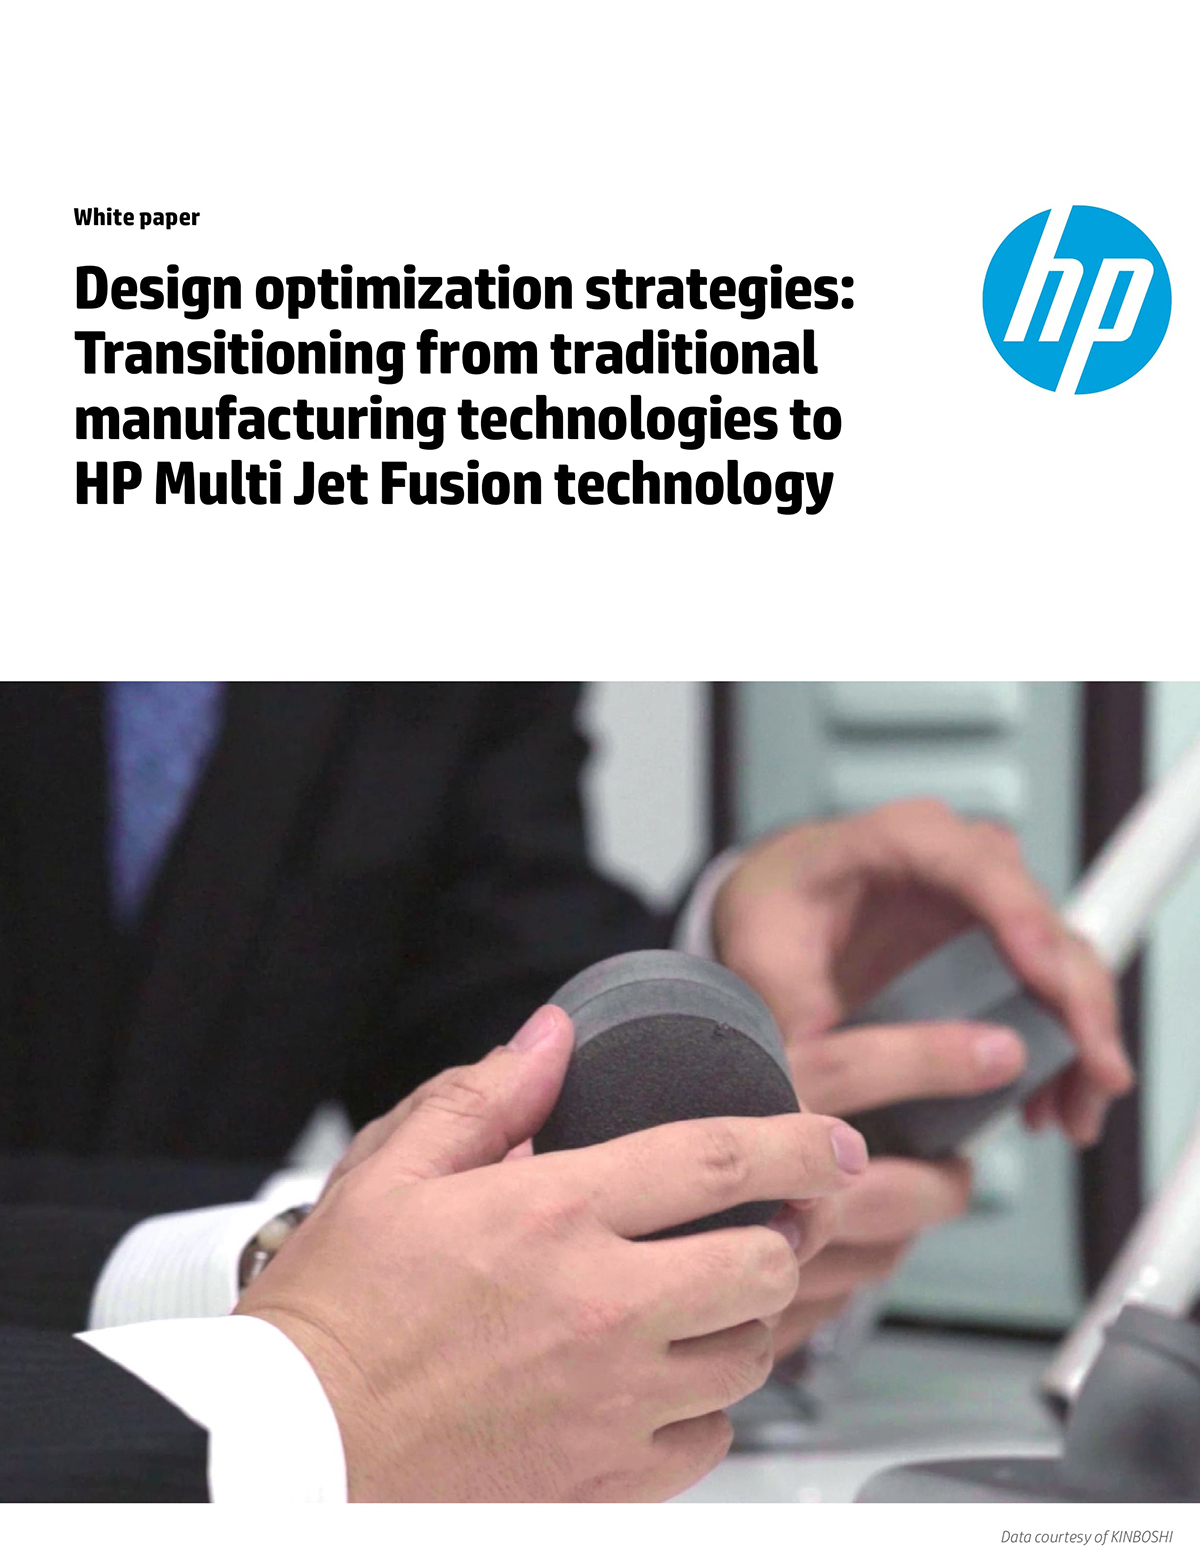 Design optimization strategies: Transitioning from traditional manufacturing technologies to HP Multi Jet Fusion technology